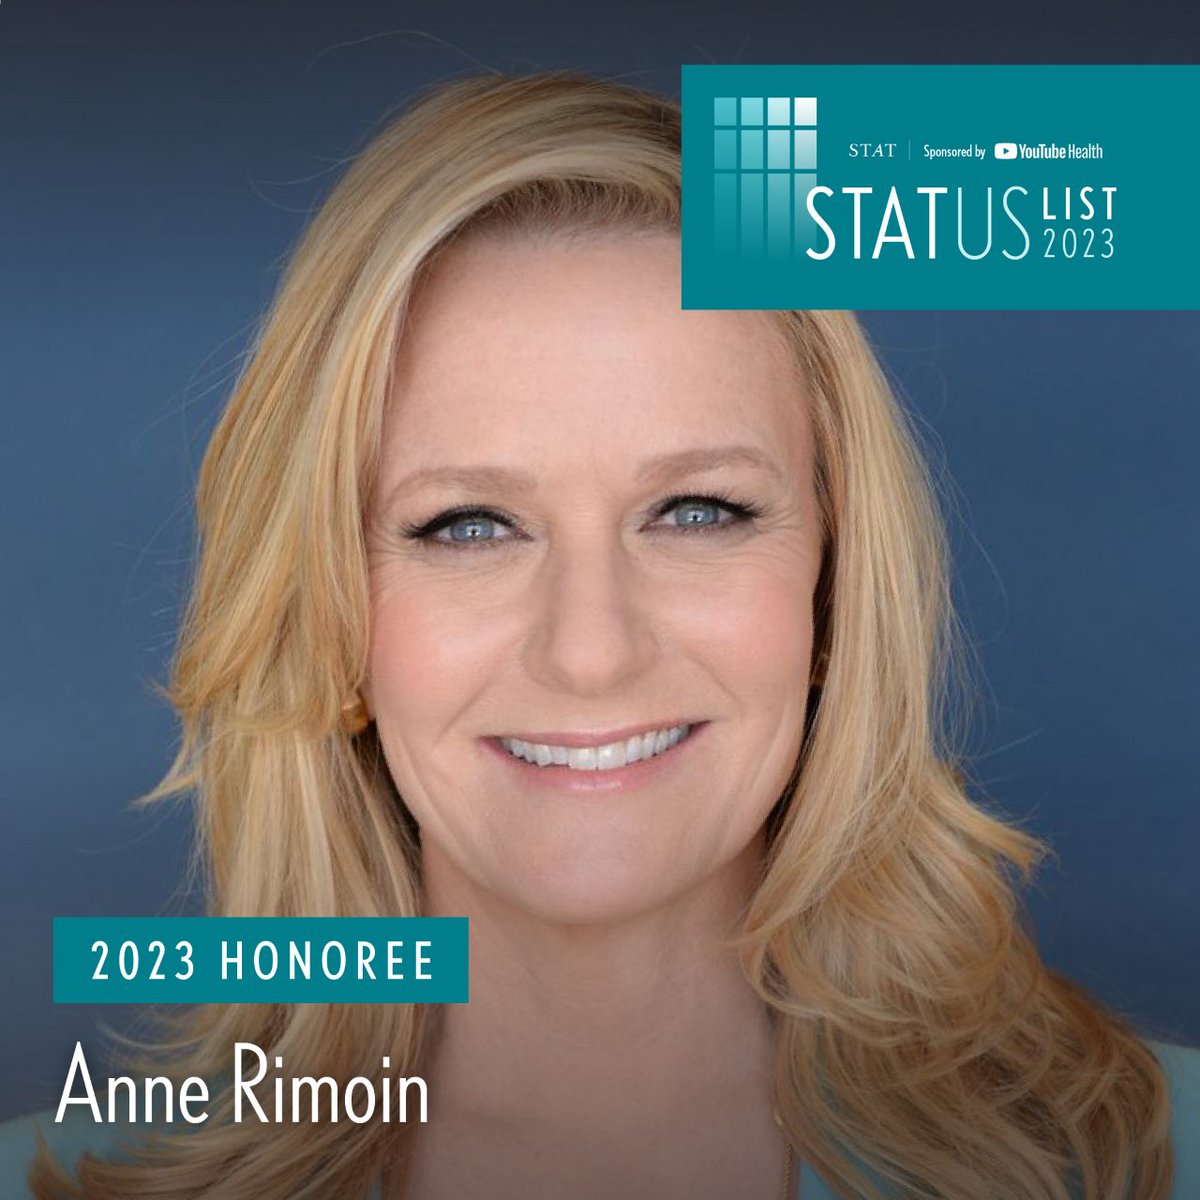 Congratulations to @arimoin, Gordon-Levin Endowed Chair in Infectious Diseases and Public Health at #UCLAFSPH, who has been selected to @statnews’ 2023 #STATUSList, which recognizes impactful leaders in the fields of health, medicine, and science. bit.ly/3YGDvkZ